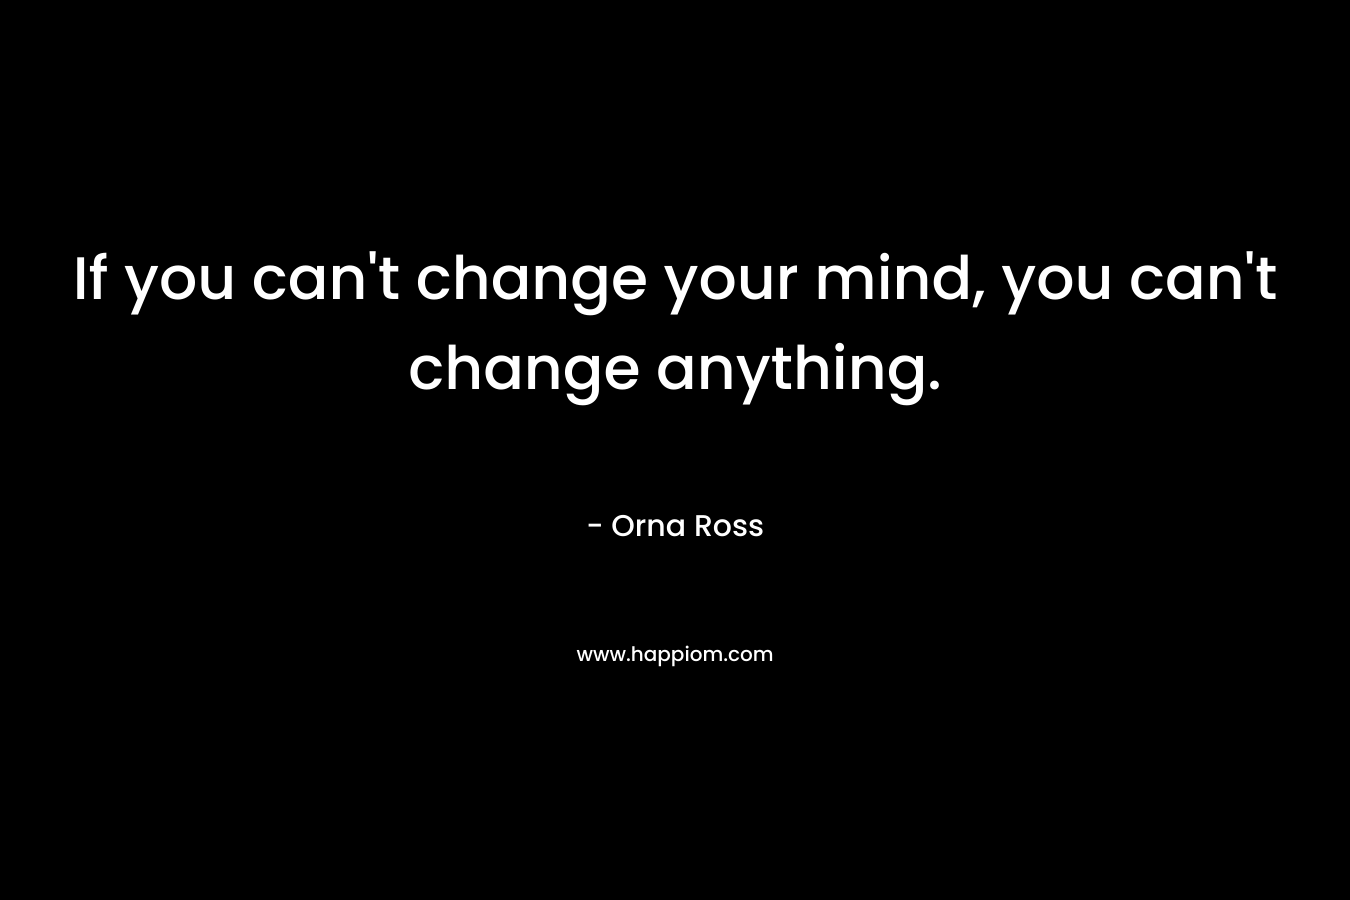 If you can’t change your mind, you can’t change anything. – Orna Ross